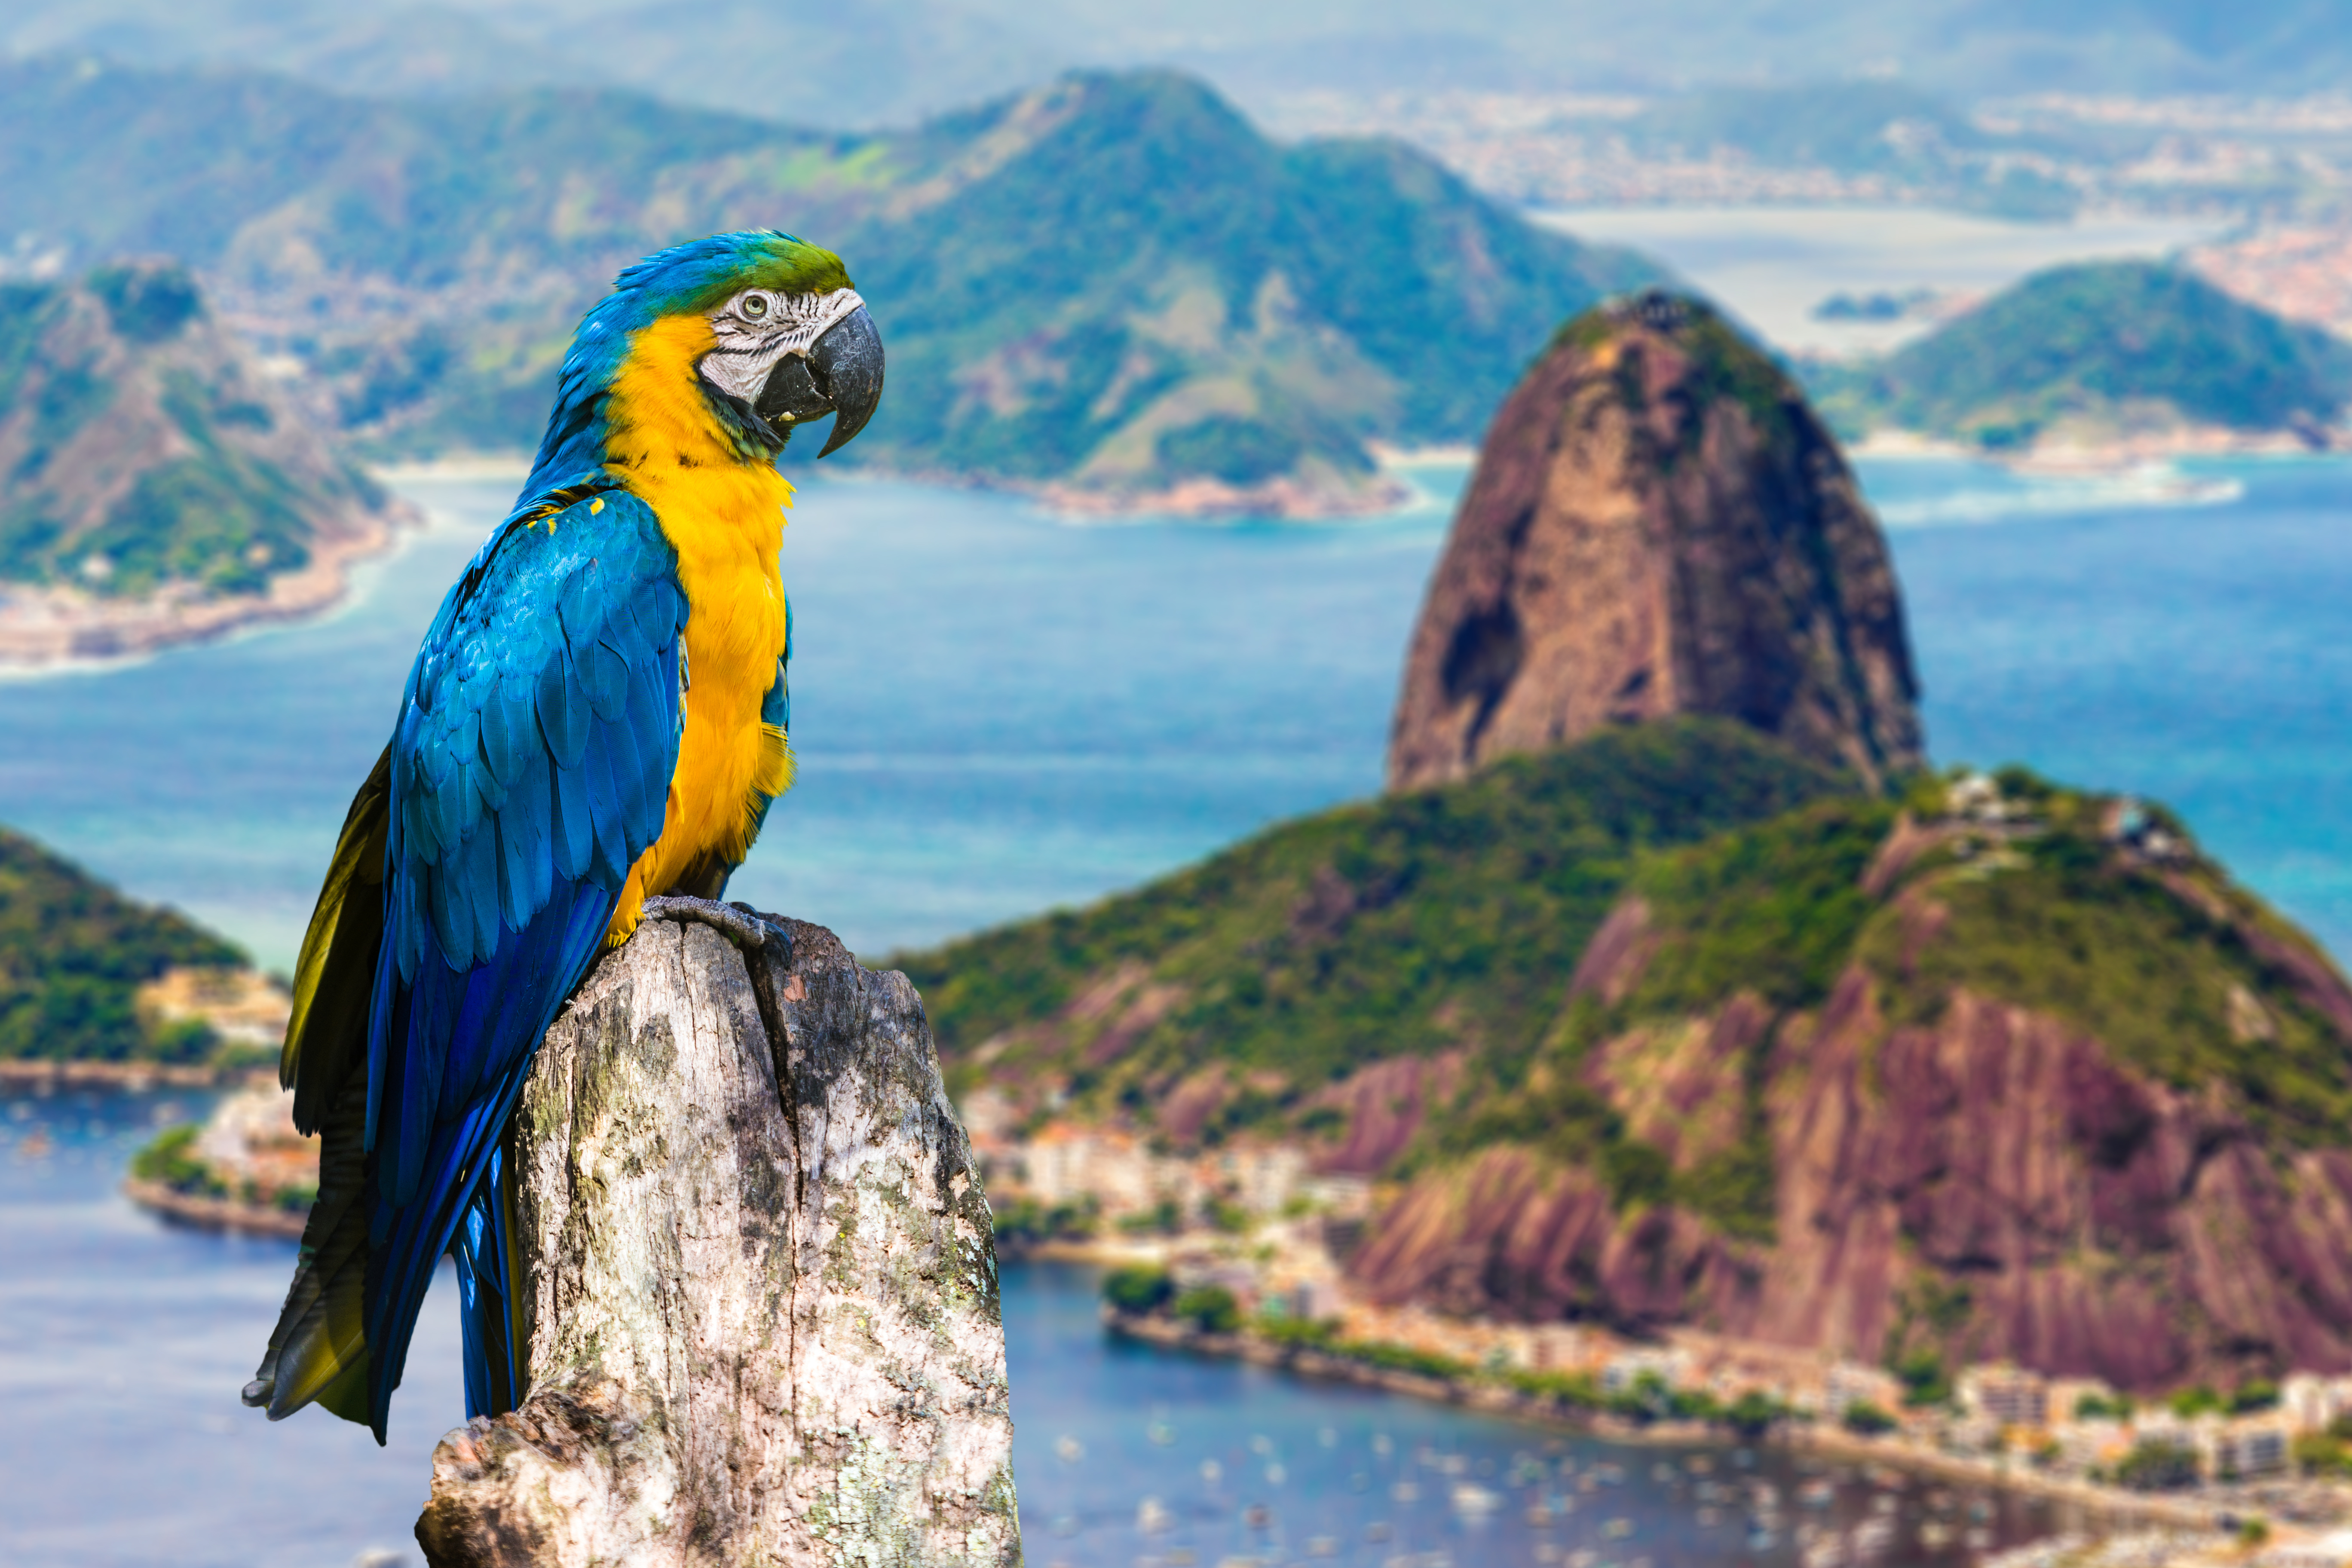 A macaw perches on a rock in the foreground. Rio's rocky, forested Sugarloaf Mountain is visible in the background, surrounded by water.